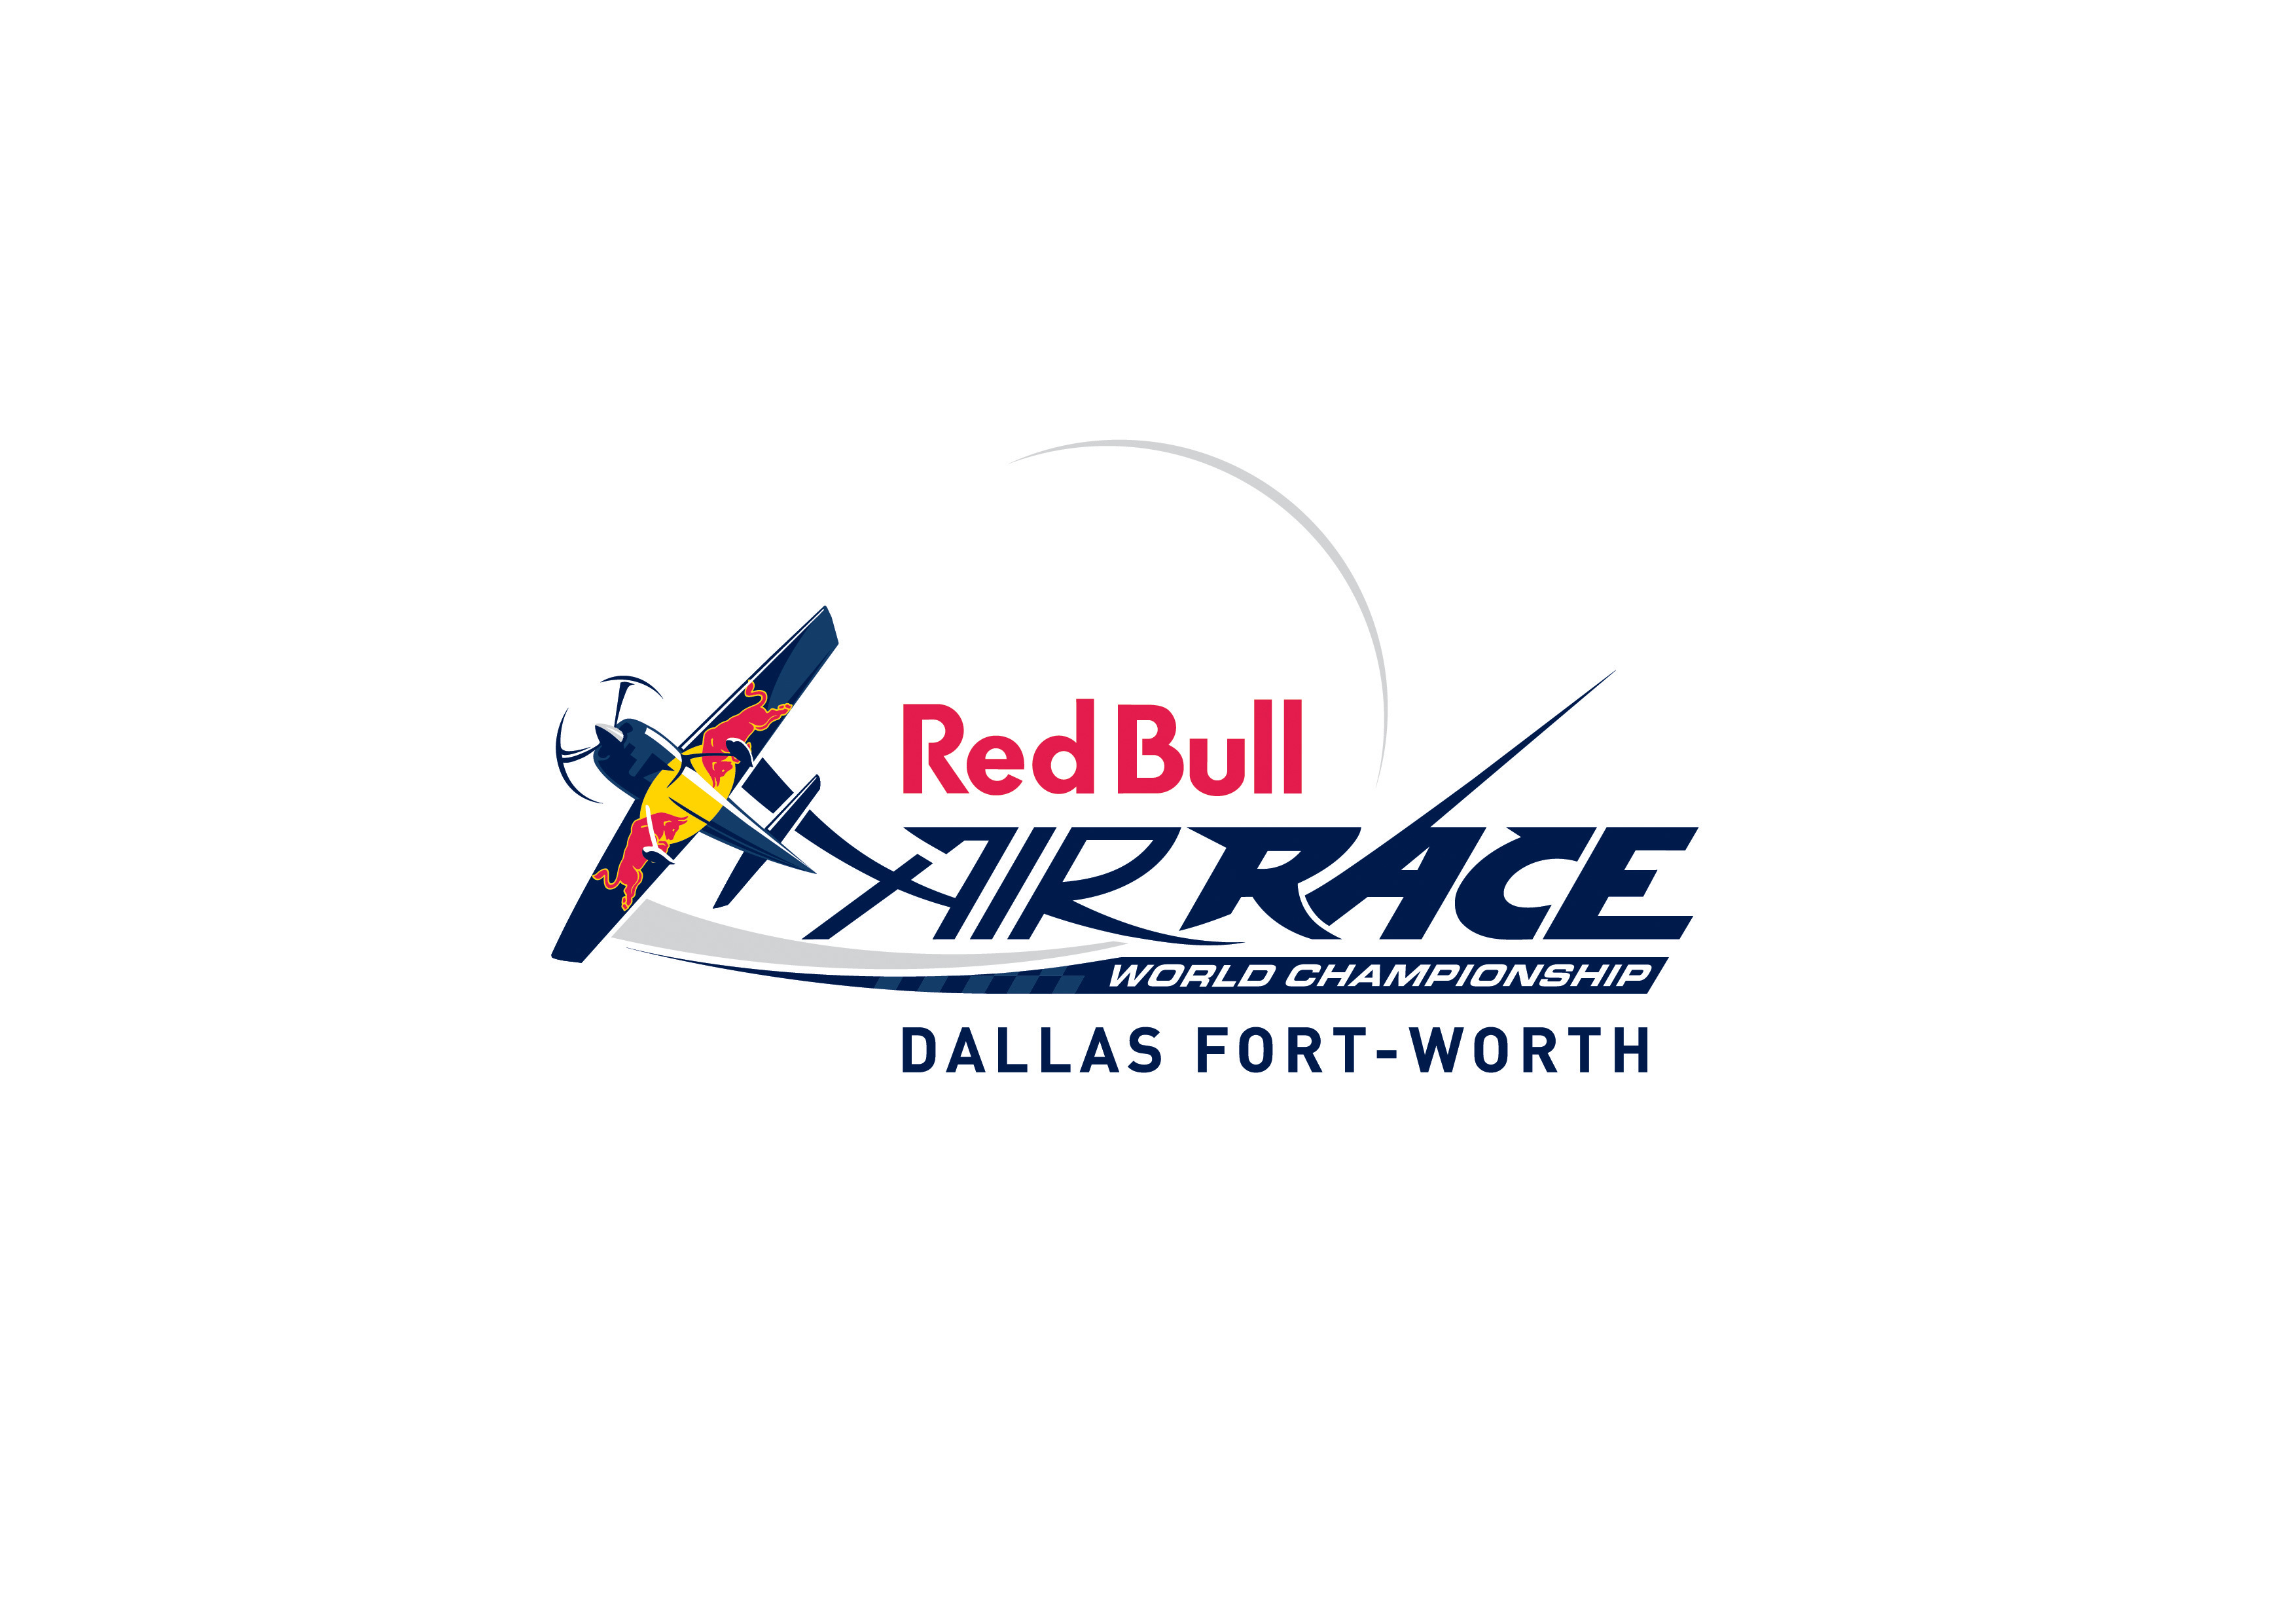 Bull Air to Touch Down in Texas for First of Two U.S. Stops | Business Wire